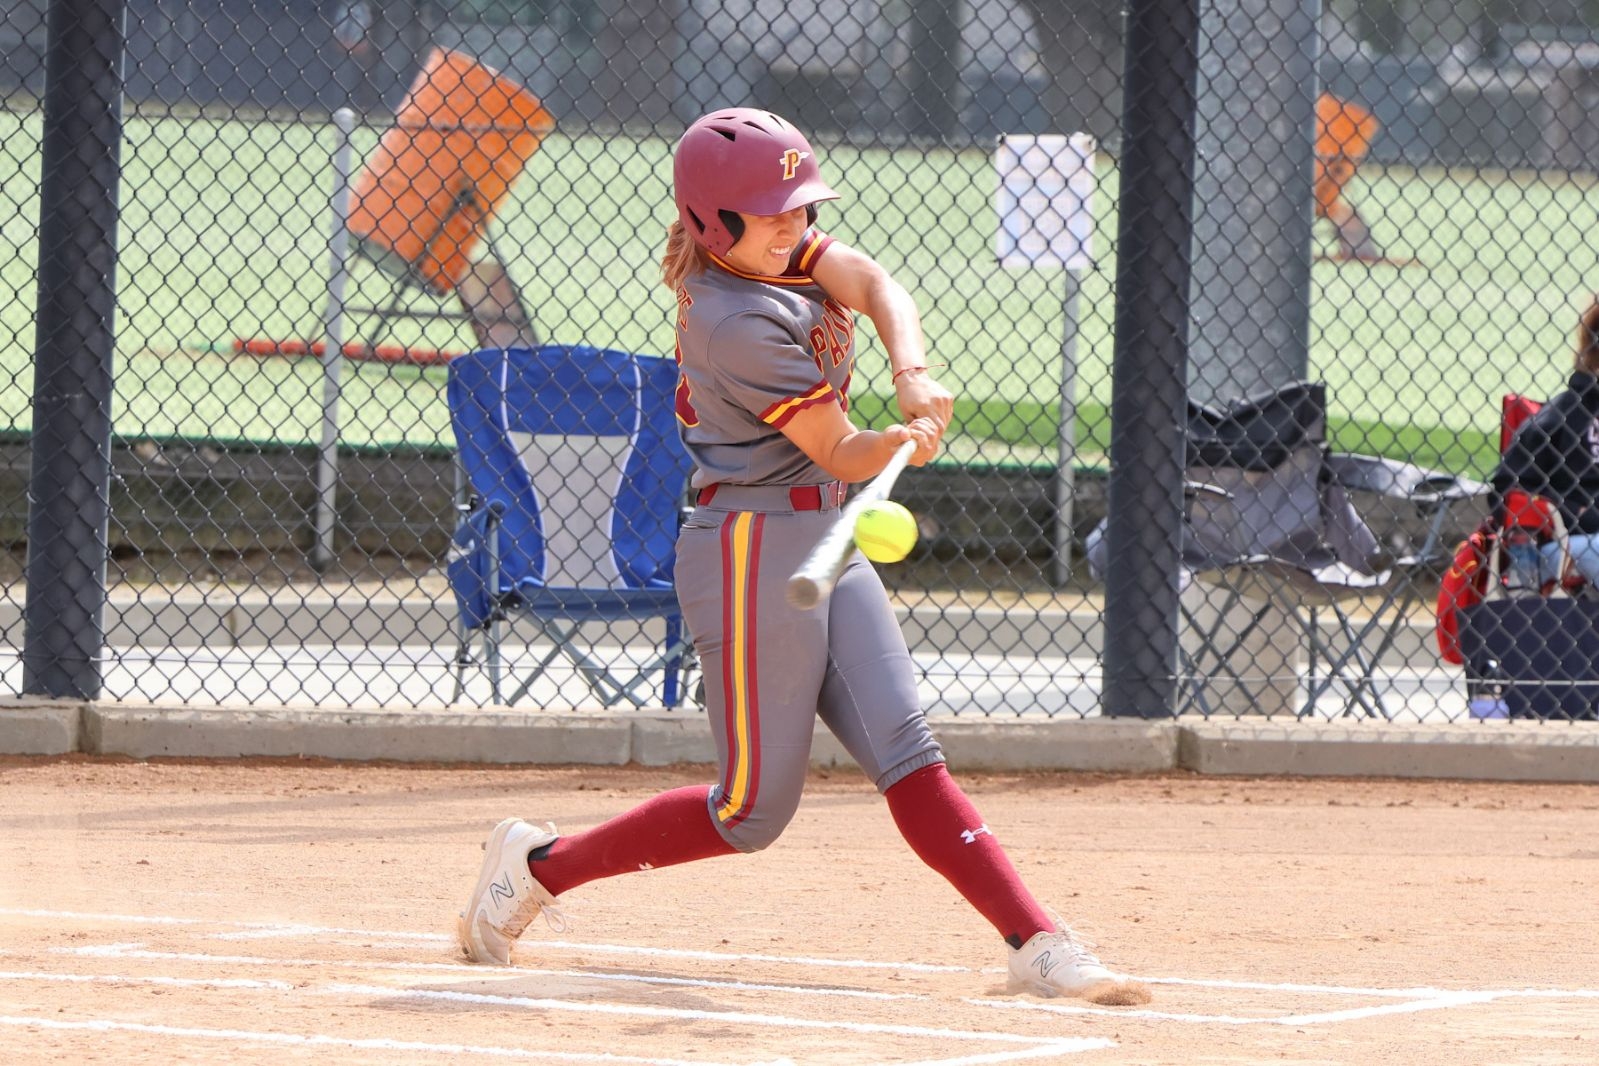 Breanna Negrete with the 2-run HR on this swing at Citrus (photo by Richard Quinton).